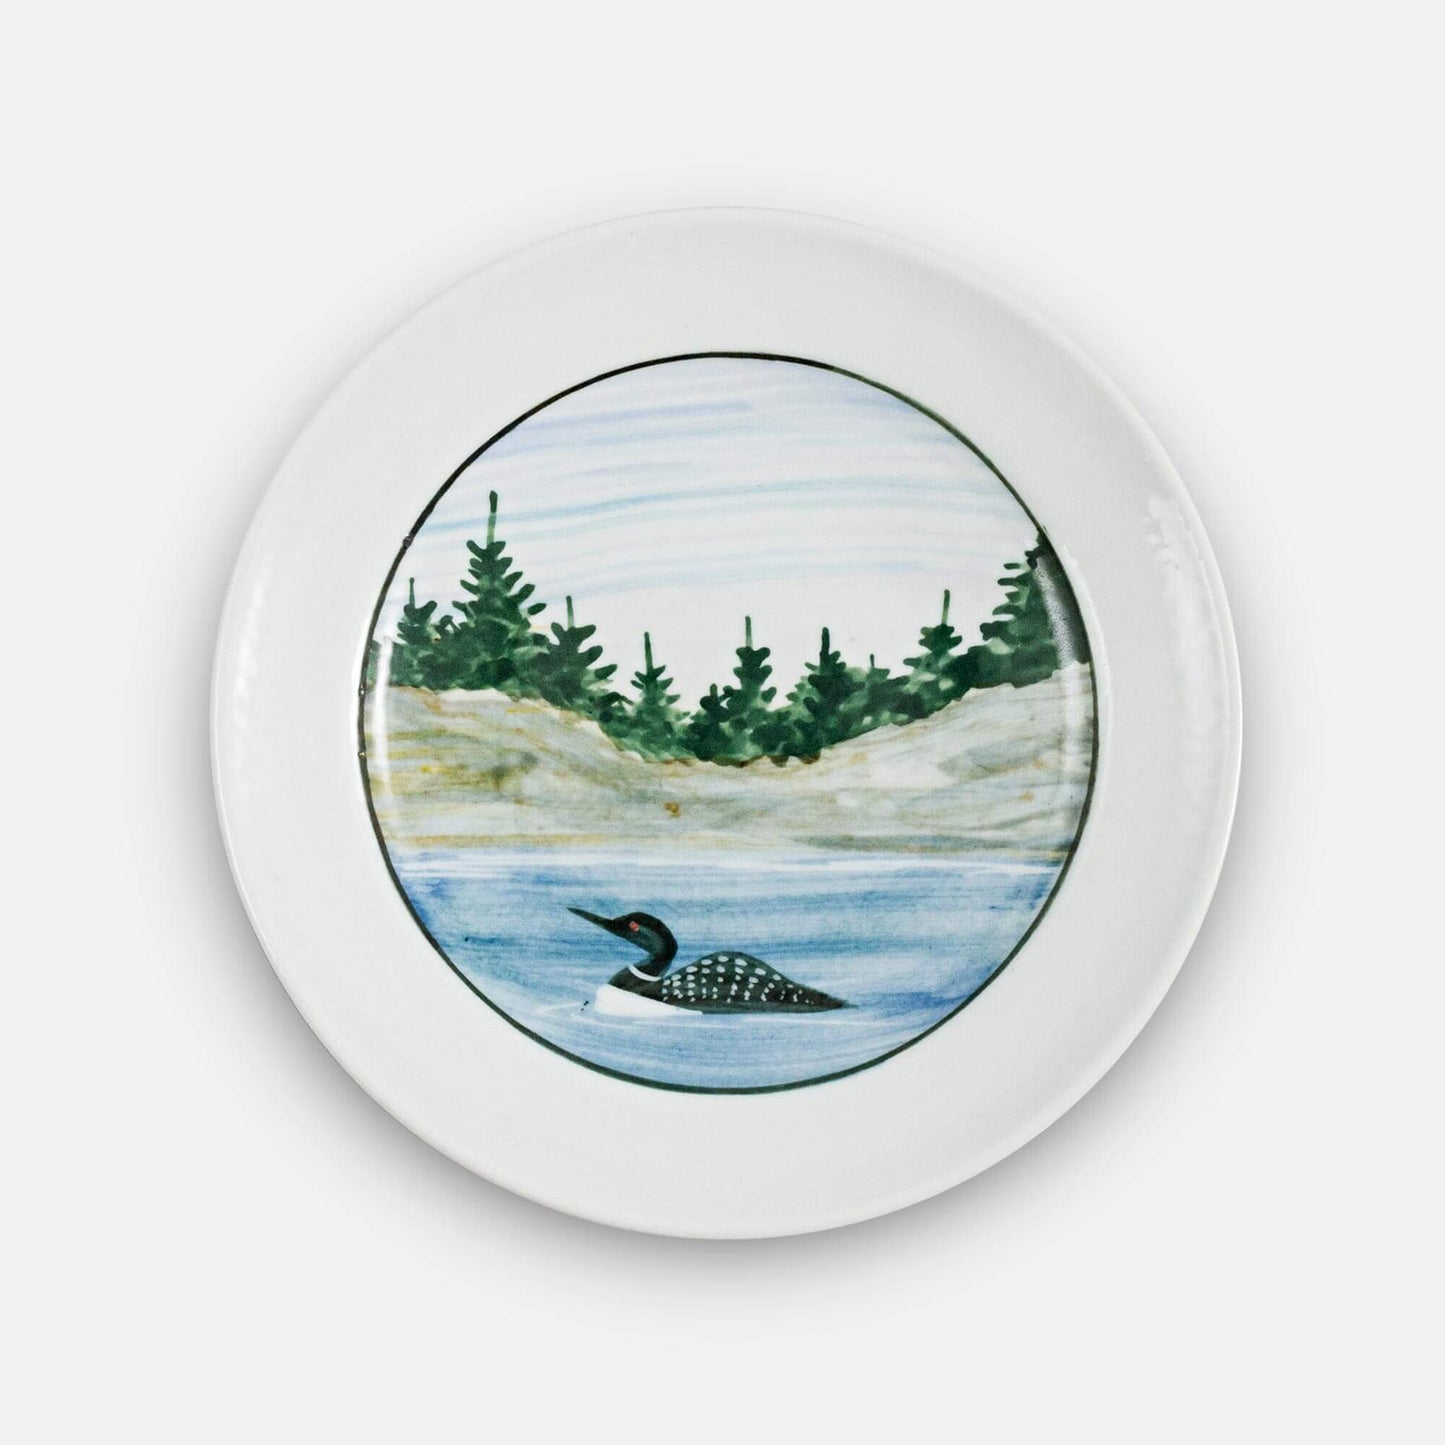 Handmade Pottery Footed Dessert Plate in Loon pattern made by Georgetown Pottery in Maine